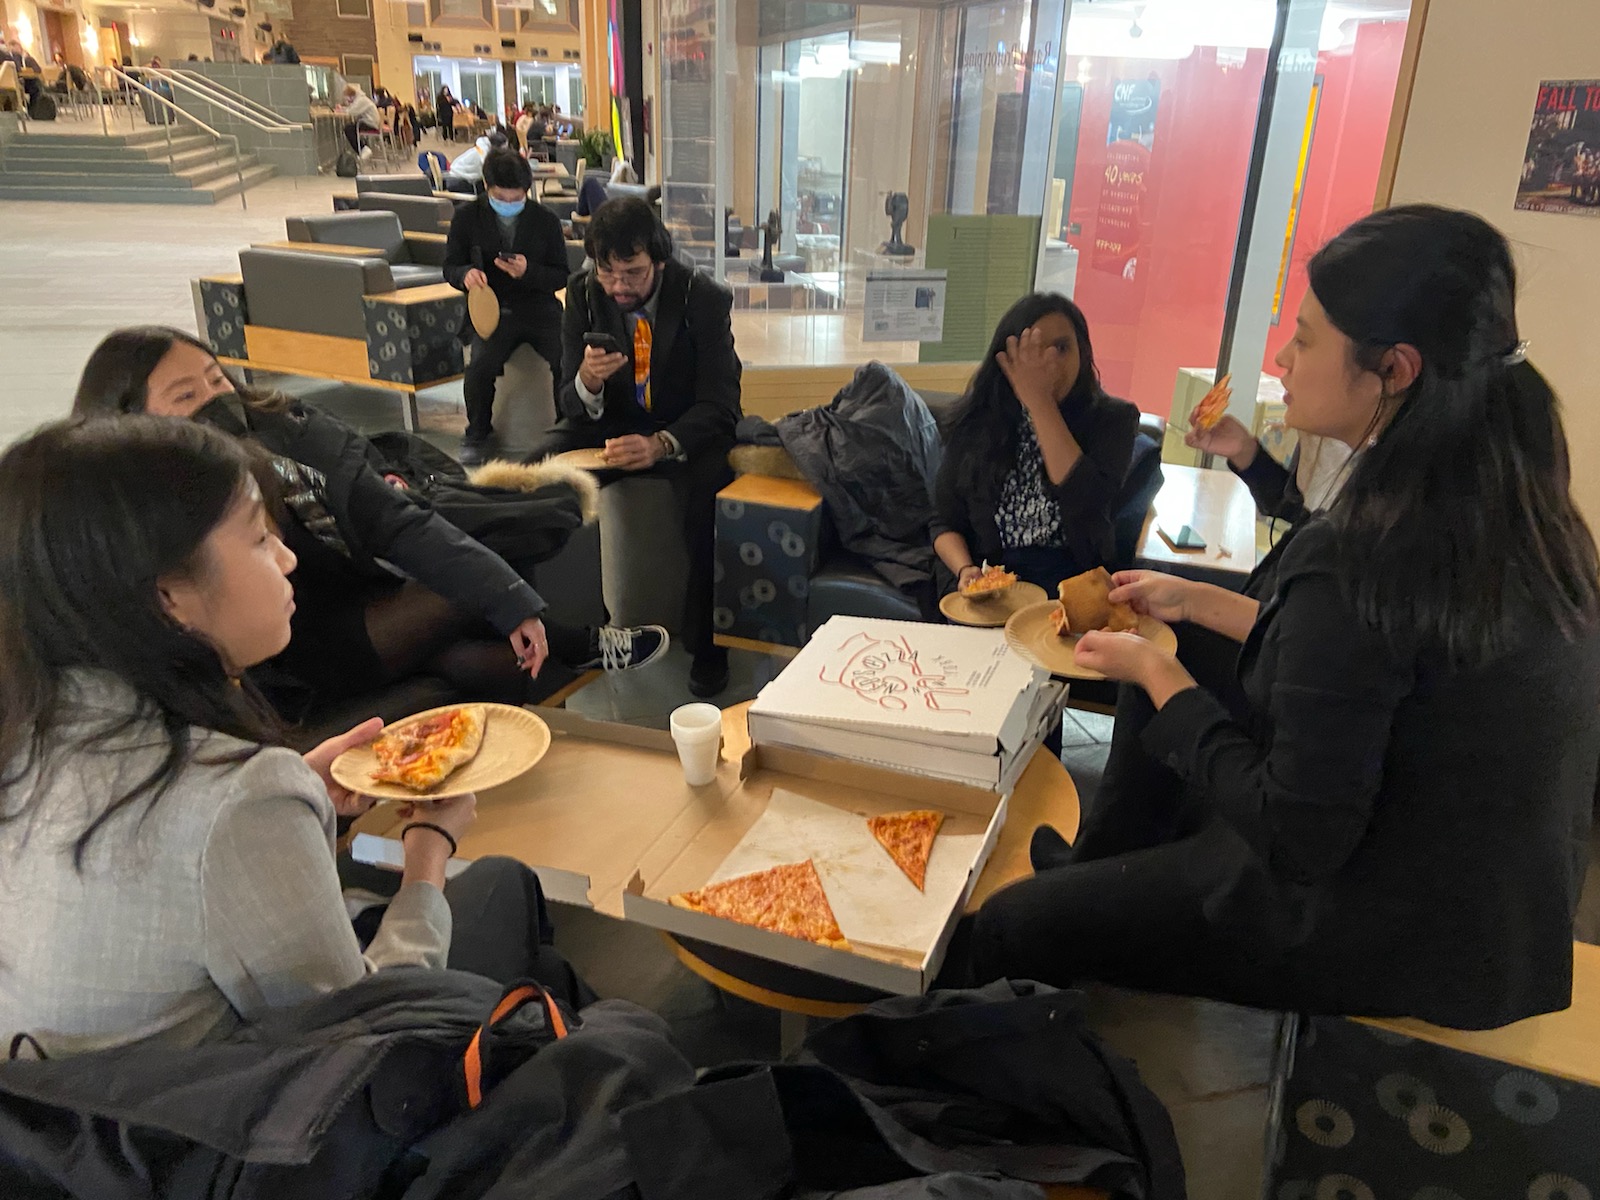 student eating pizza